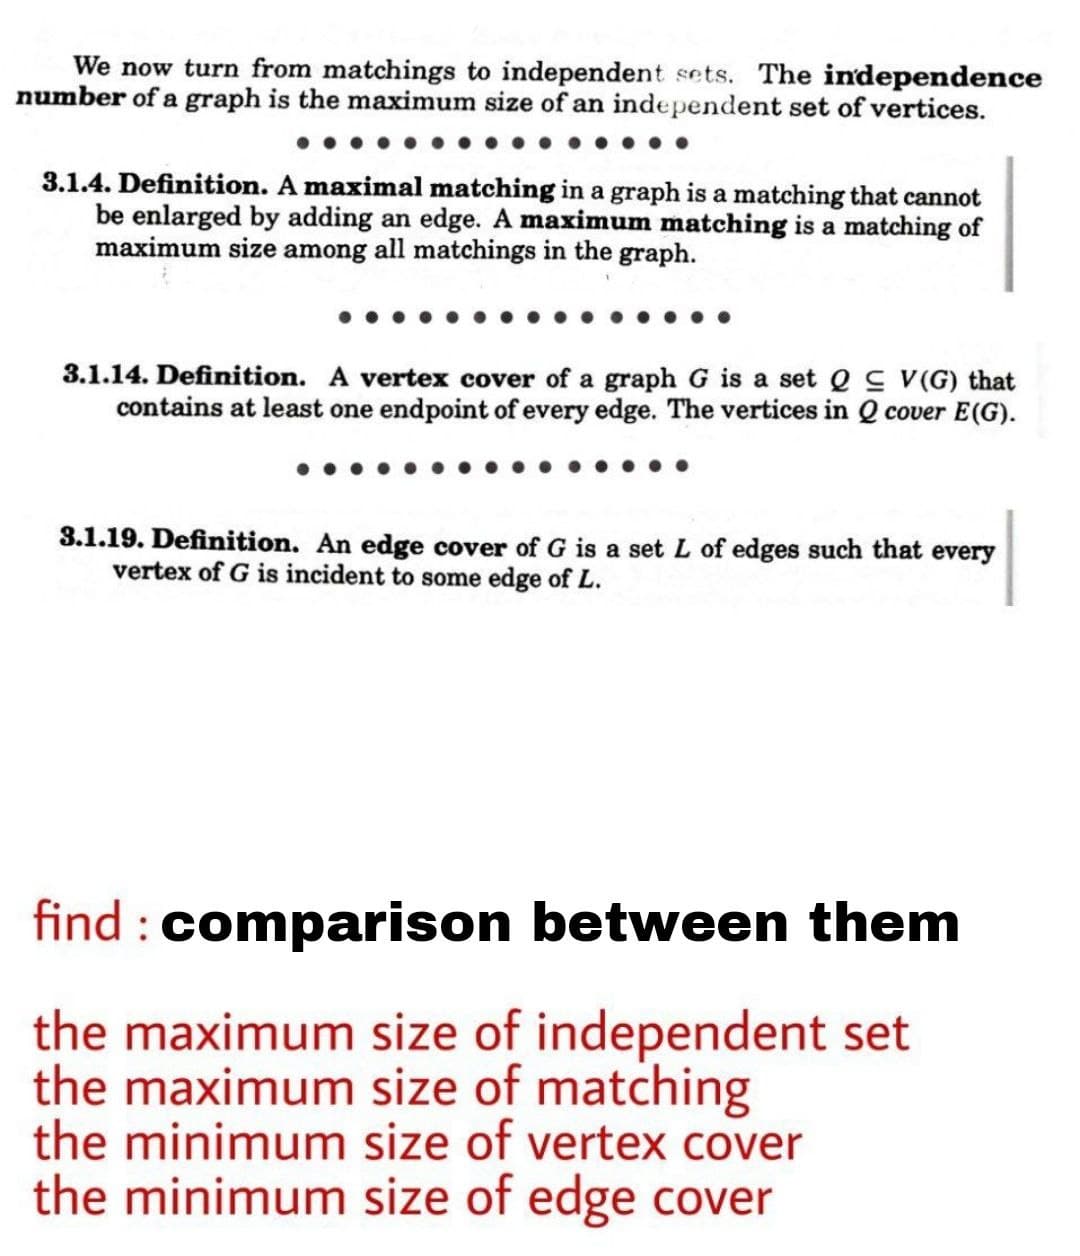 We now turn from matchings to independent sets. The independence
number of a graph is the maximum size of an independent set of vertices.
3.1.4. Definition. A maximal matching in a graph is a matching that cannot
be enlarged by adding an edge. A maximum matching is a matching of
maximum size among all matchings in the graph.
3.1.14. Definition. A vertex cover of a graph G is a set e s v(G) that
contains at least one endpoint of every edge. The vertices in Q cover E(G).
3.1.19. Definition. An edge cover of G is a set L of edges such that every
vertex of G is incident to some edge of L.
find : comparison between them
the maximum size of independent set
the maximum size of matching
the minimum size of vertex cover
the minimum size of edge cover
